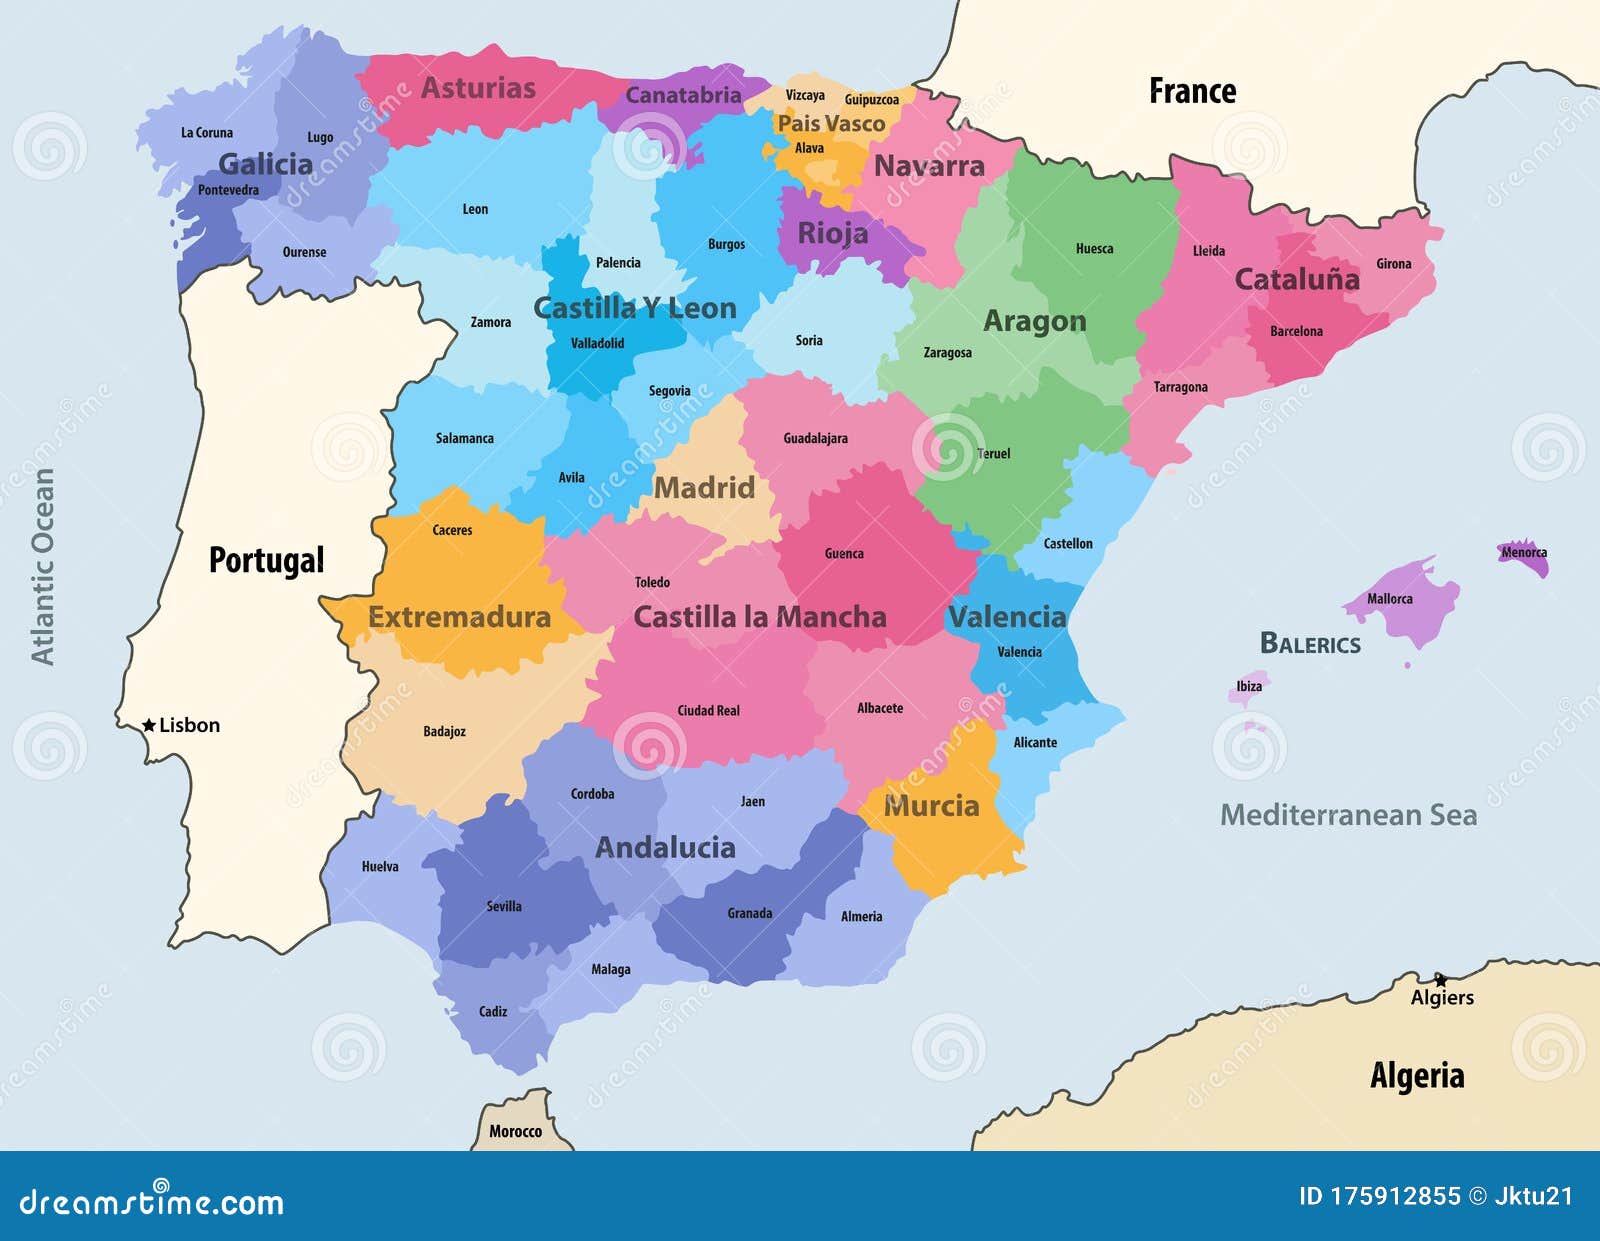 spain autonomous communities and provinces  map with neighbour countries and territories